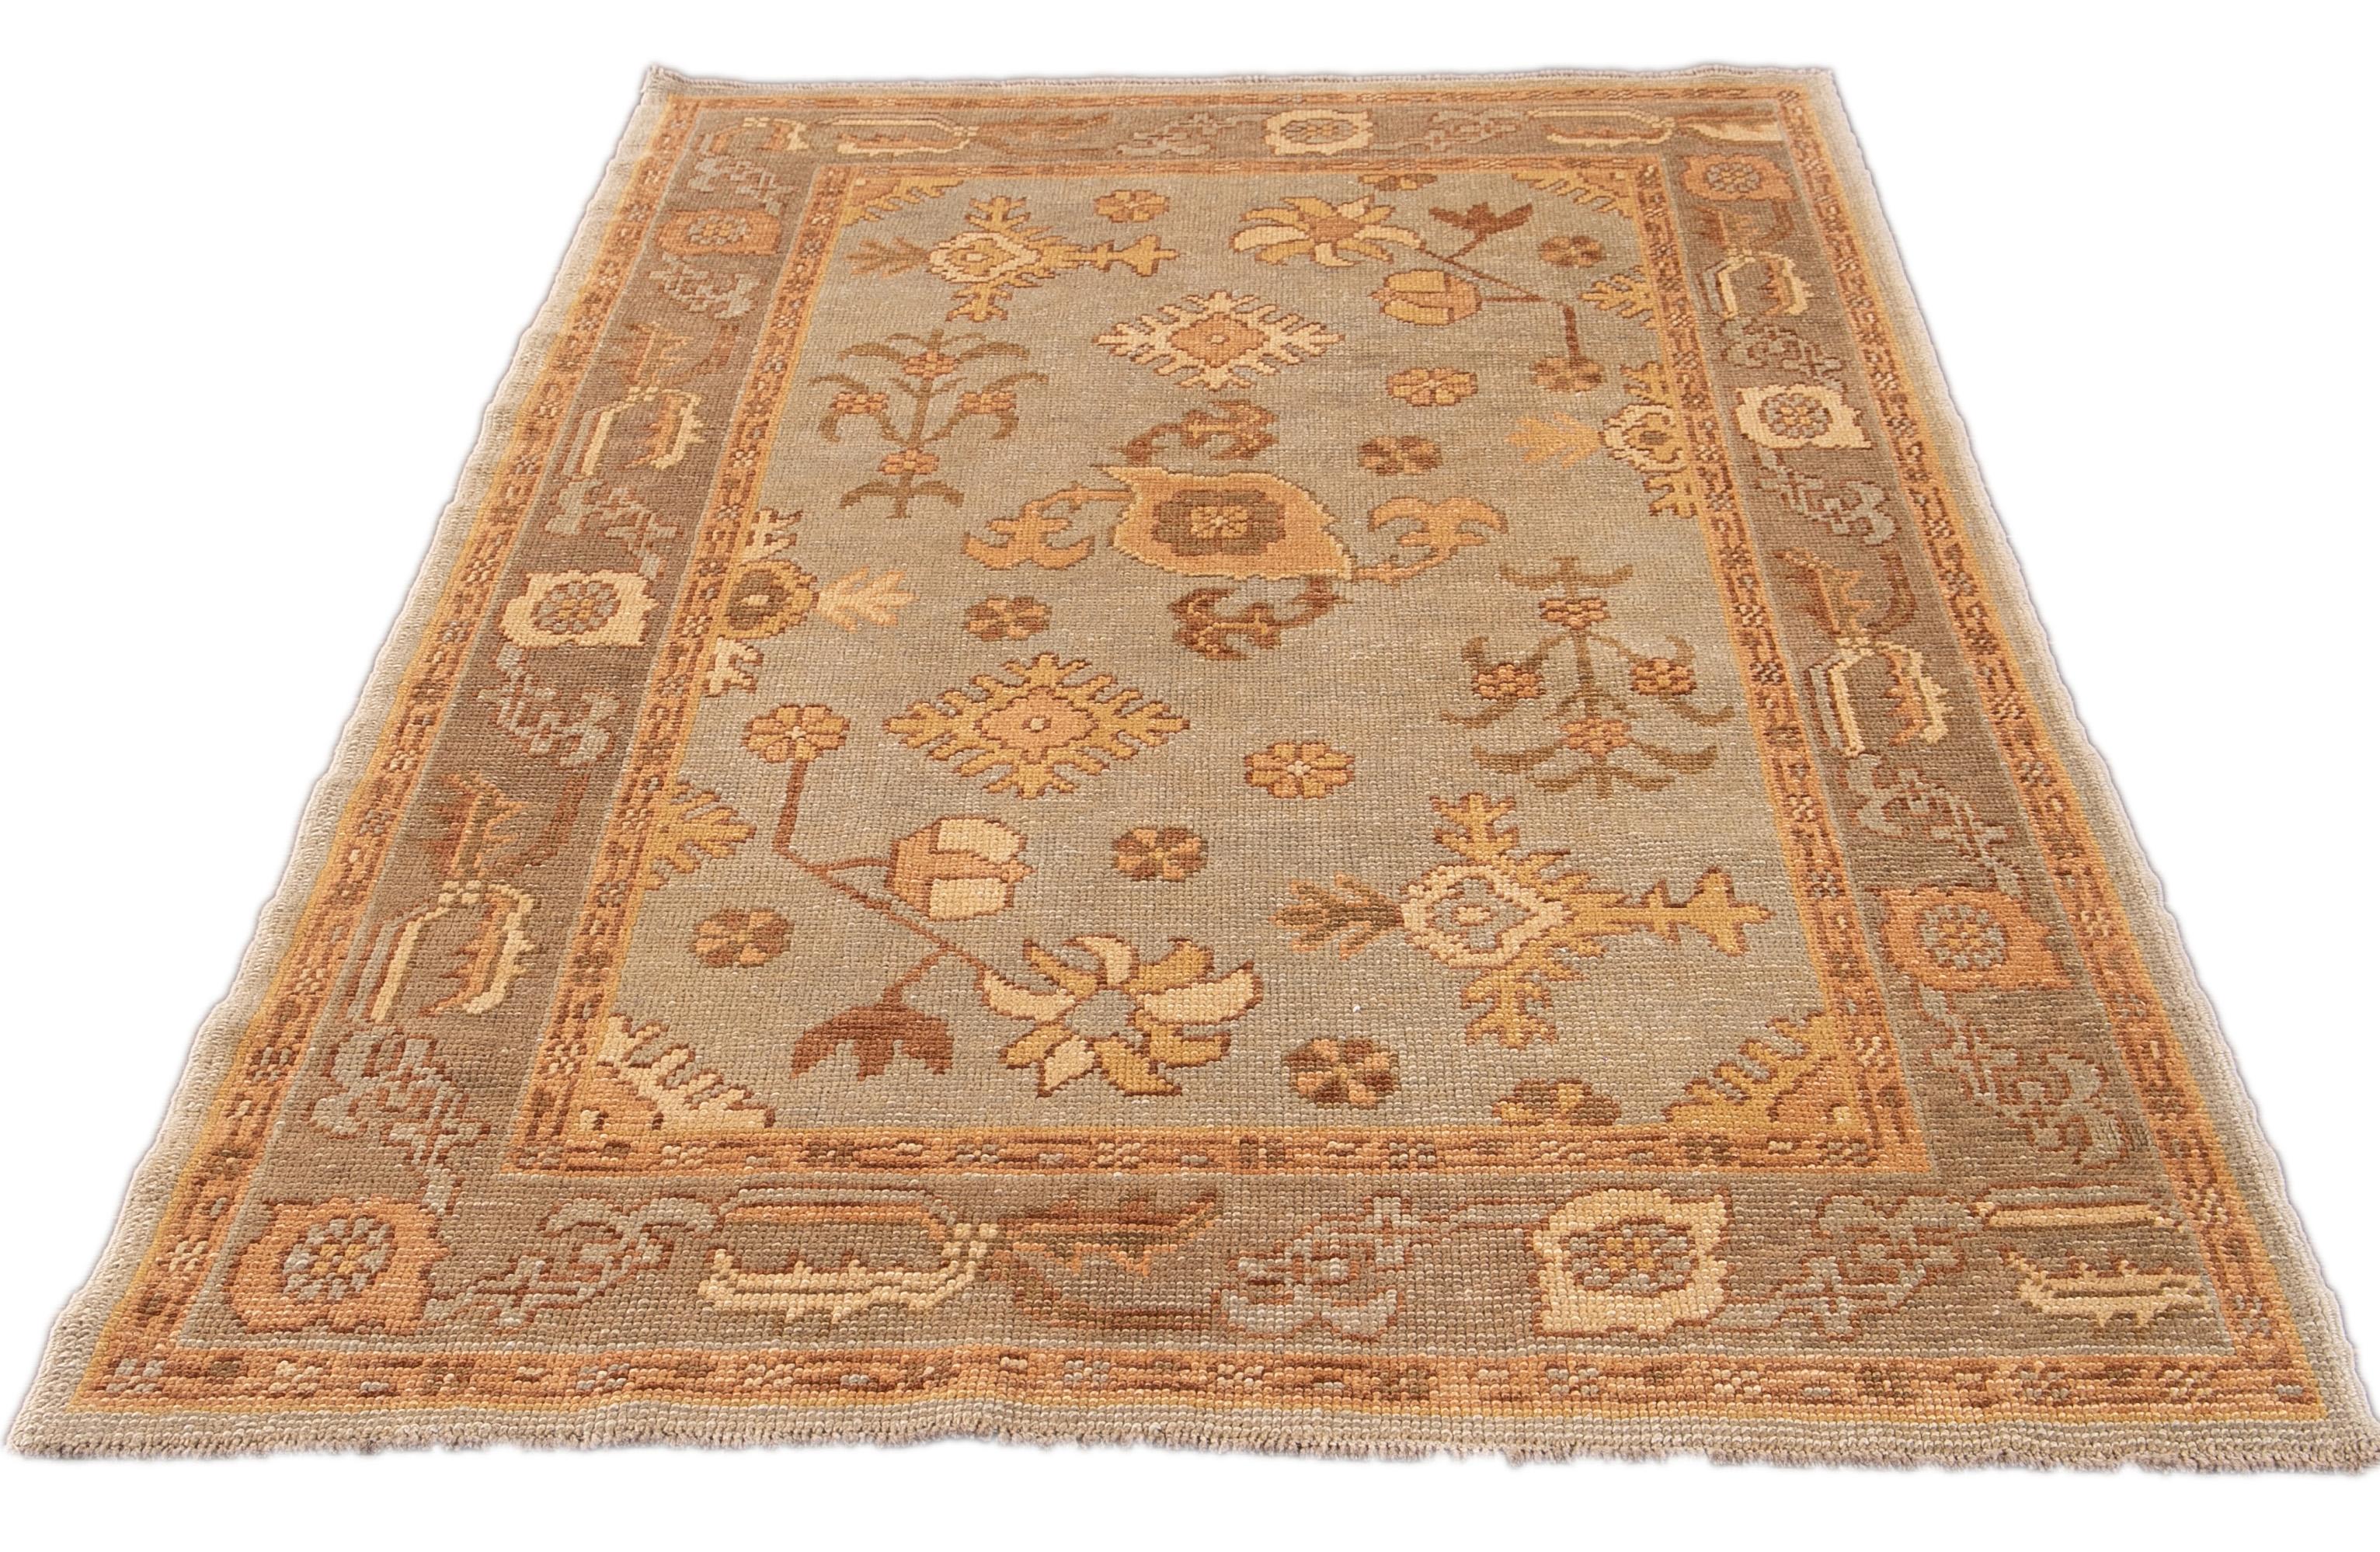 Beautiful Modern Turkish Oushak hand-knotted scatter wool rug with a light blue field. This Oushak has accents and a frame of yellow, tan, and green in an all-over geometric floral design.

This rug measures: 4'2